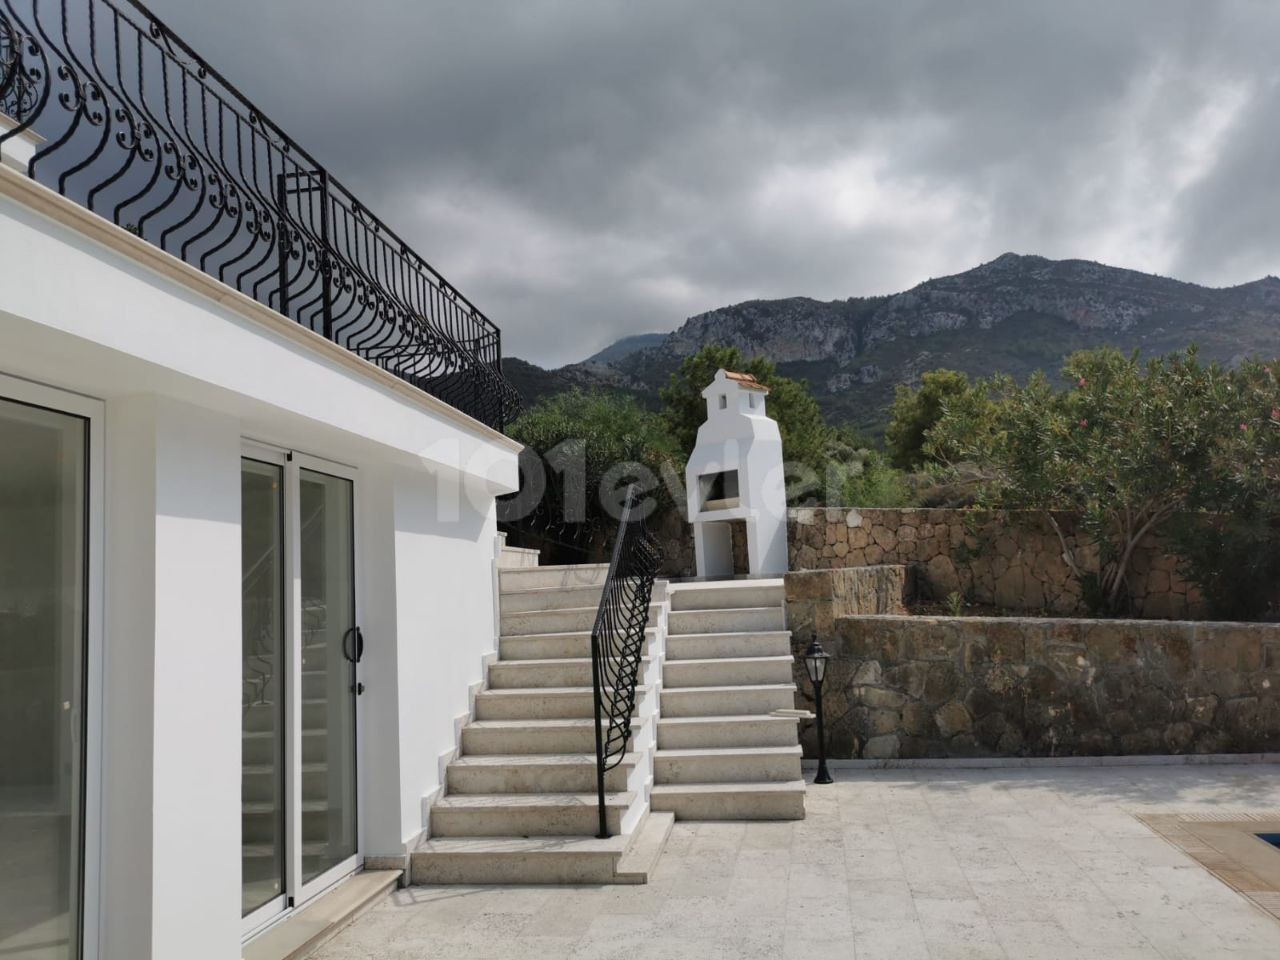 4 Bedroom Unfurnished Villa with Private Pool, Private Location + Gas Central Heating (Can also be rented Furnished for 1,550 GBP)